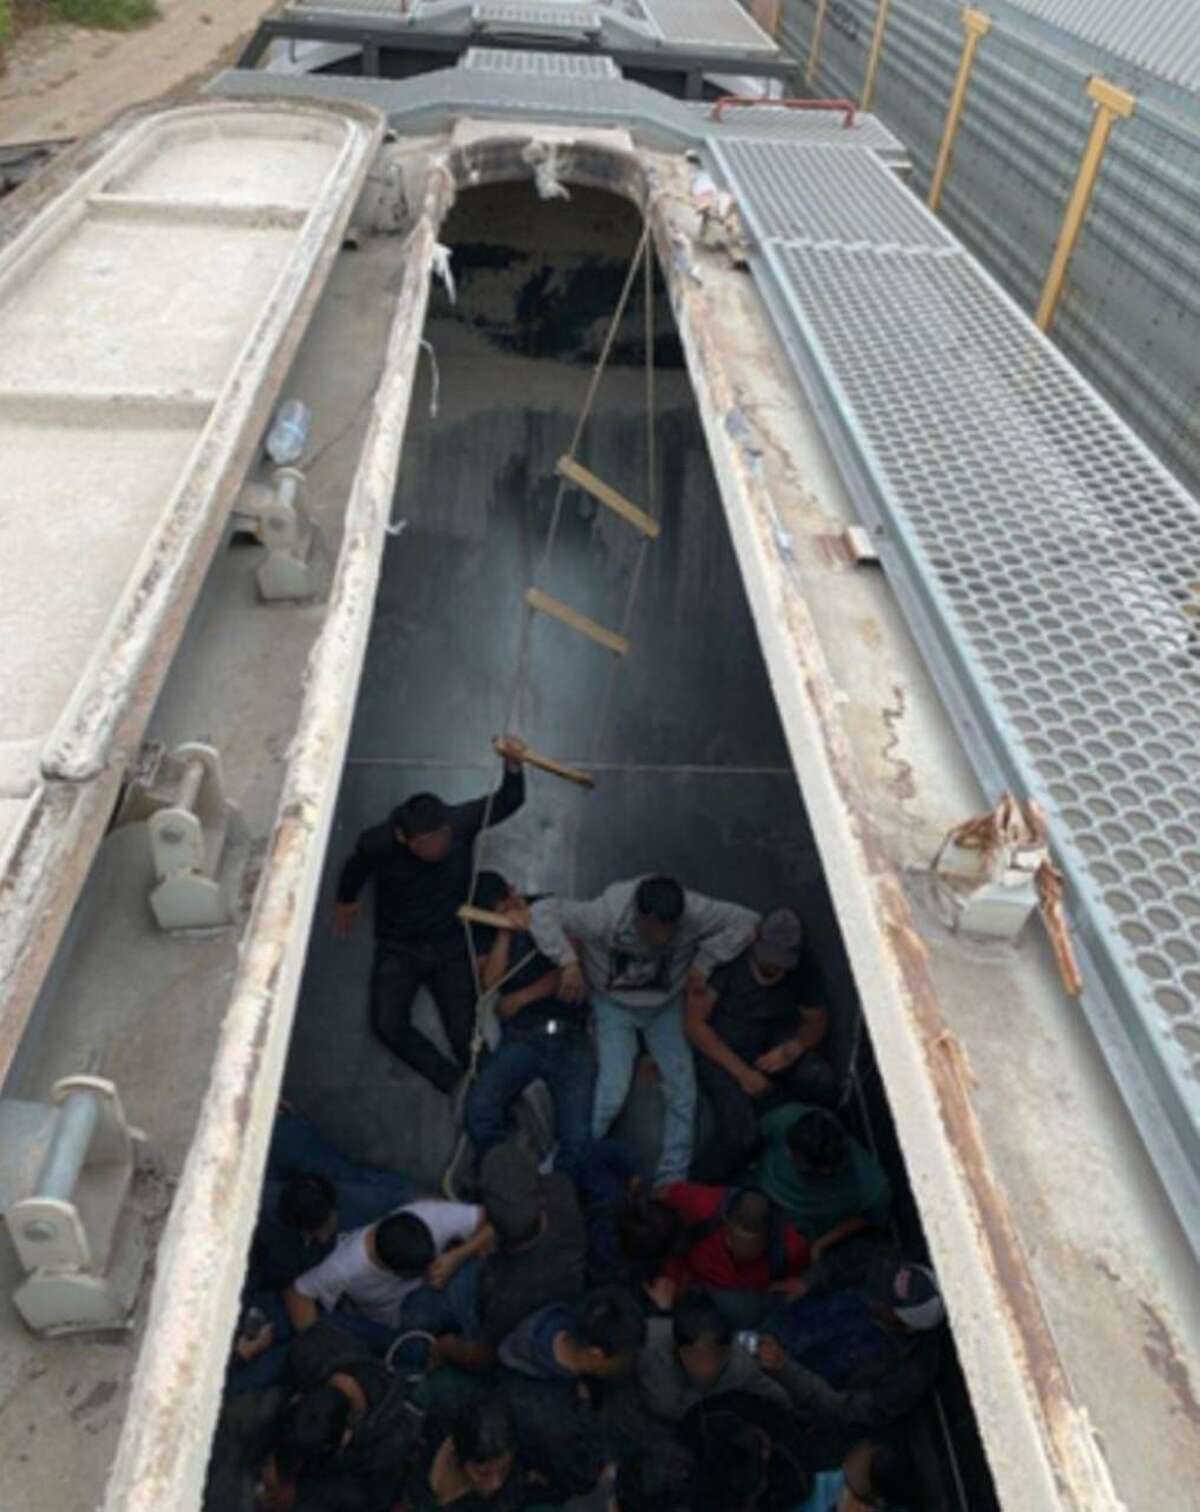 U.S. Border Patrol agents assigned to the Hebbronville Station rescued an unresponsive woman found inside a grain hopper railcar and detained a large group of immigrants who had crossed the border illegally.